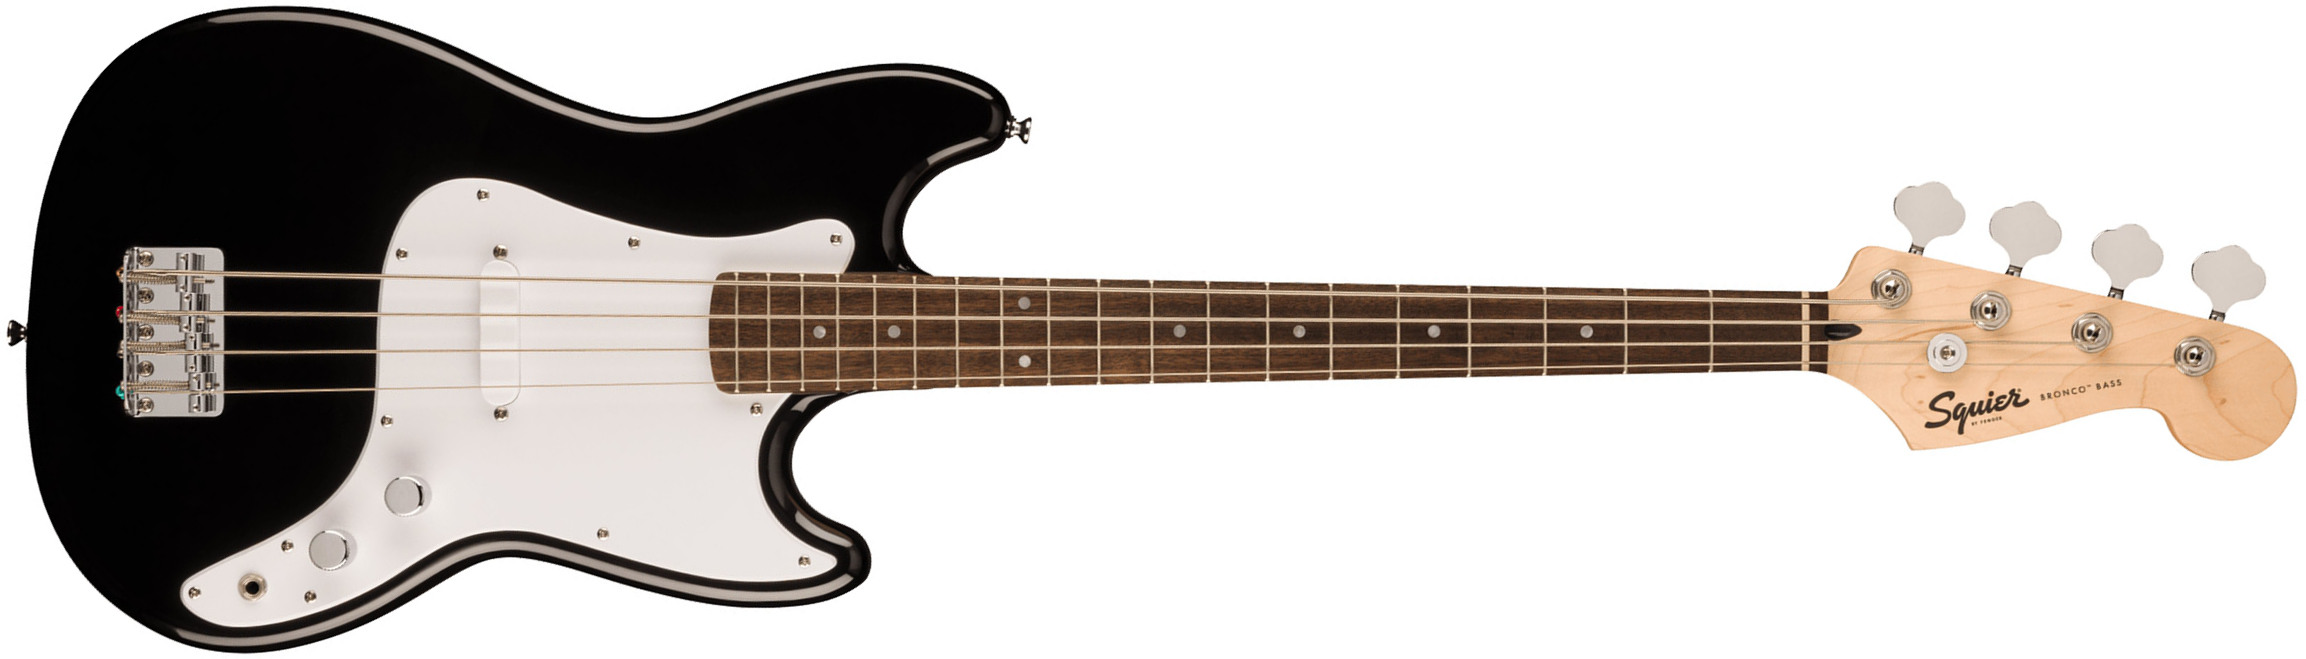 Squier Bronco Bass Sonic Lau - Black - Solid body electric bass - Main picture